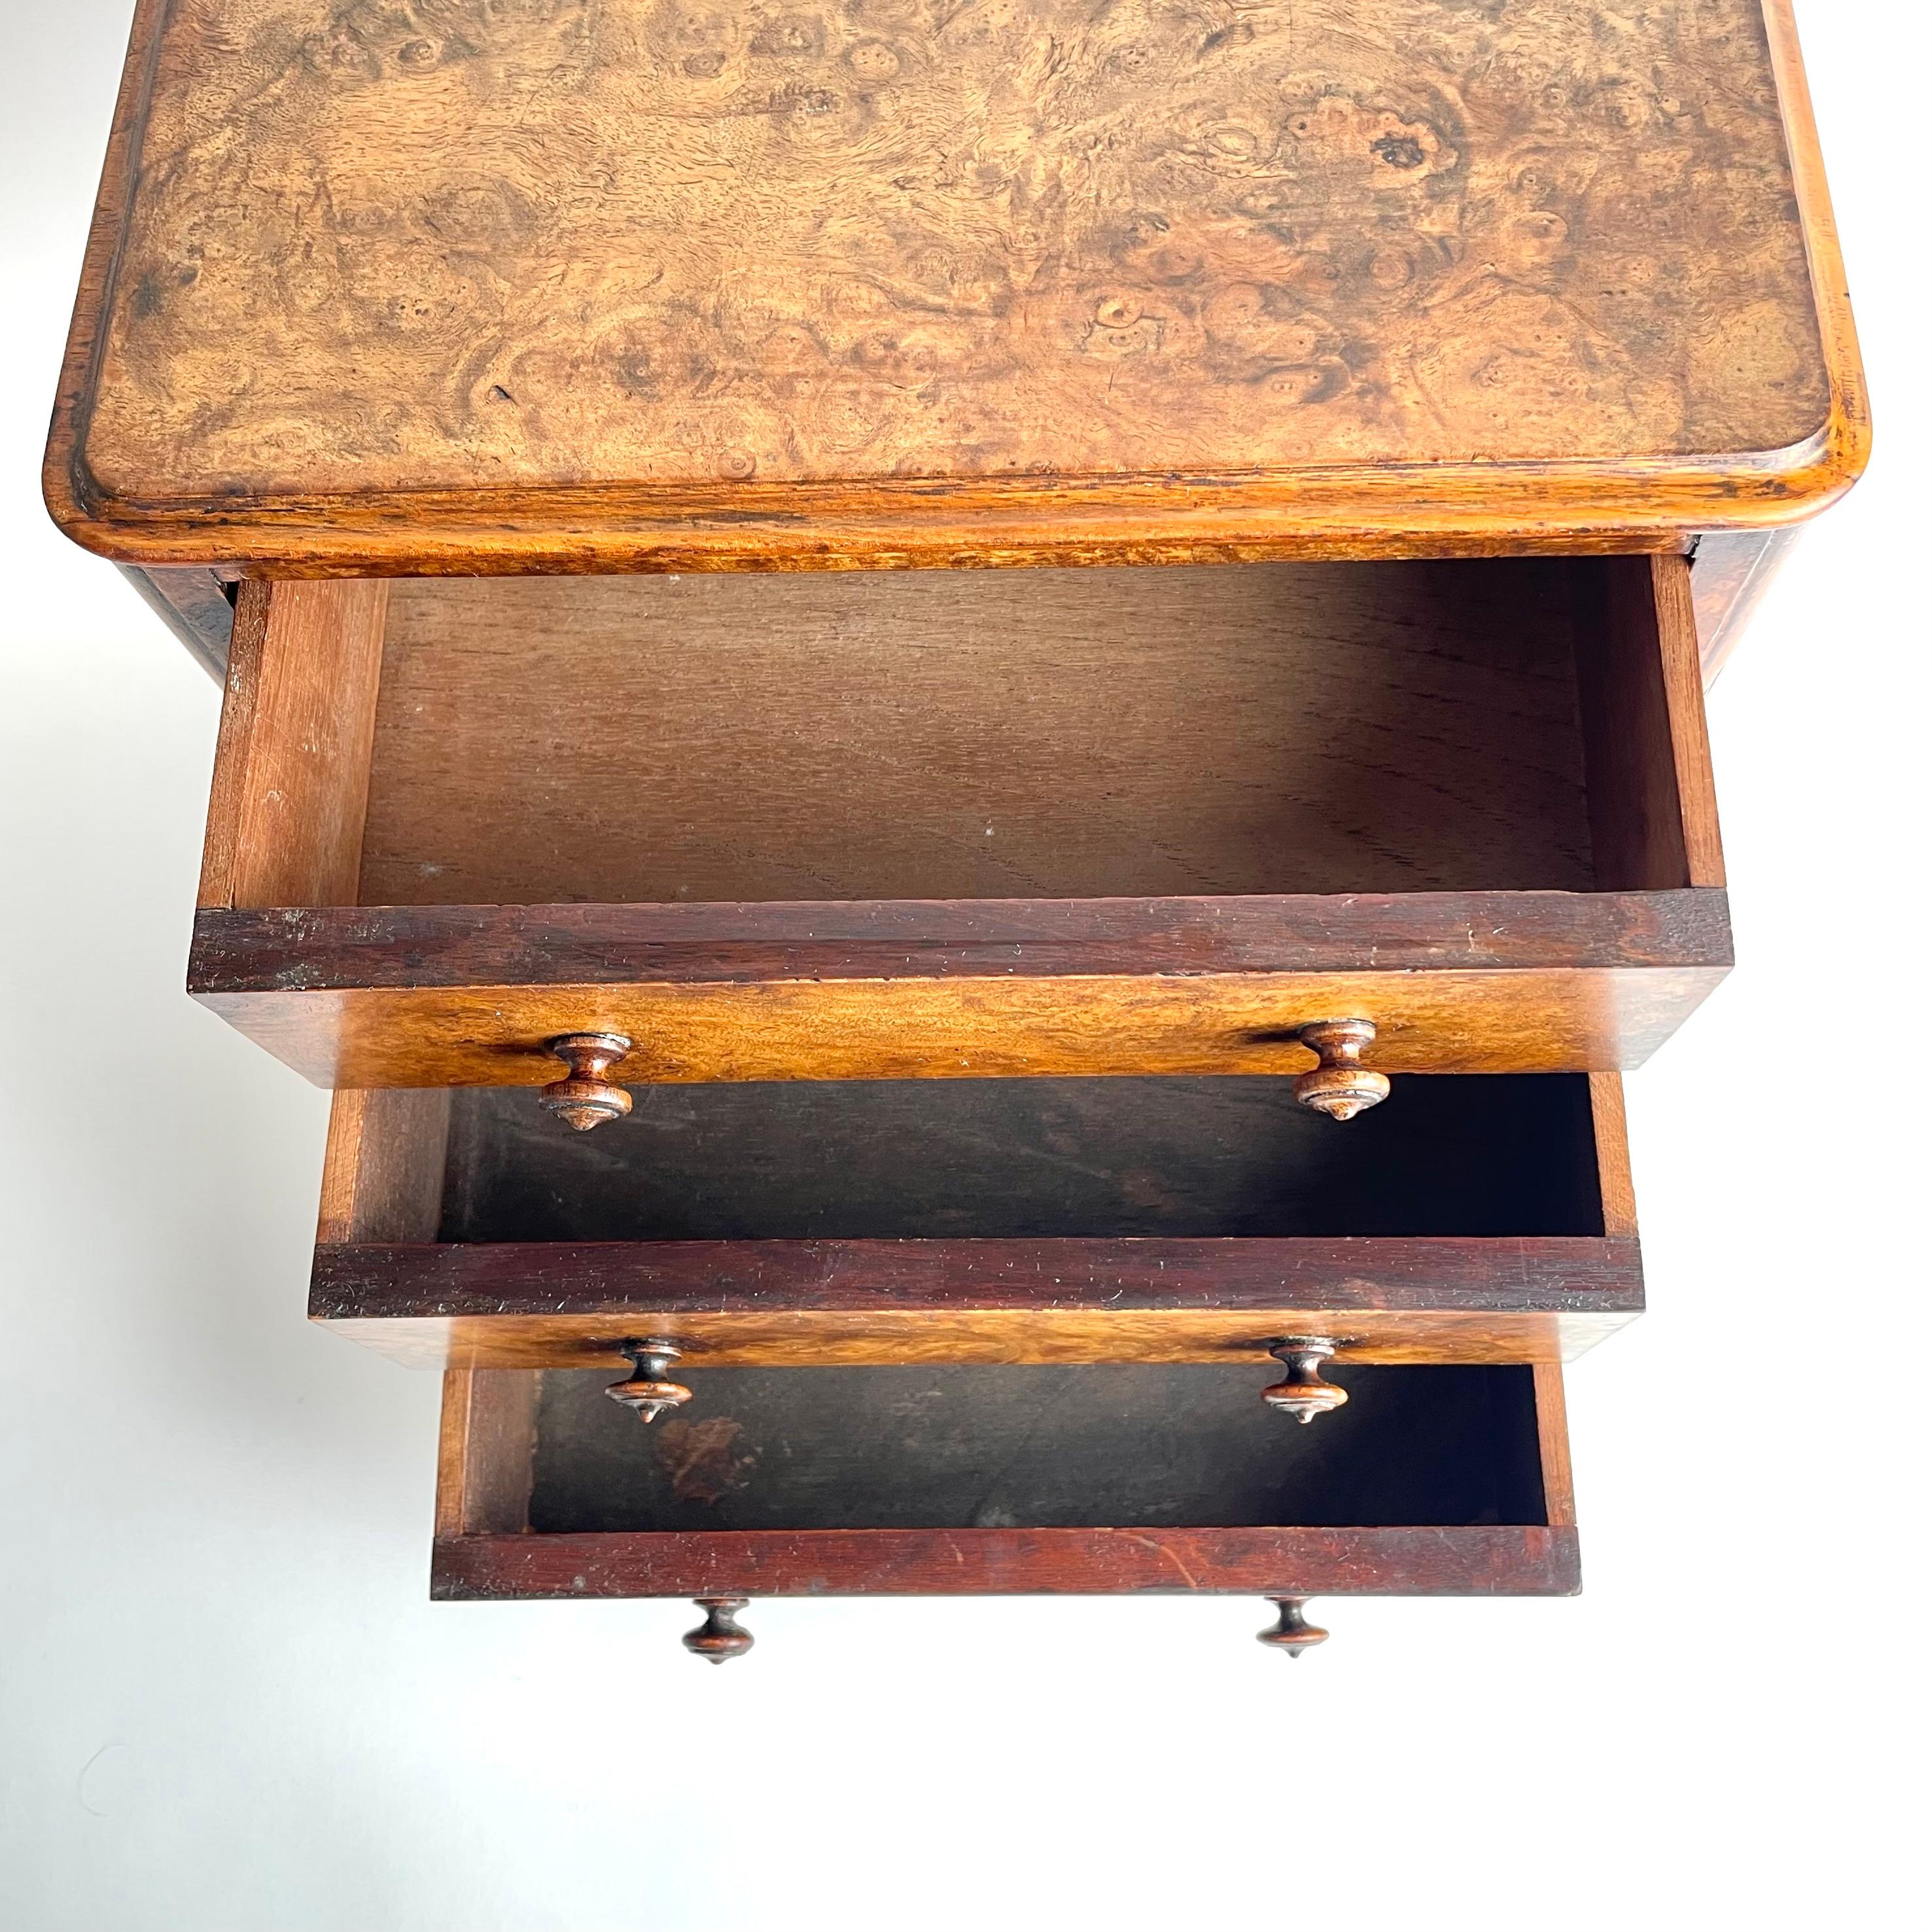 Elegant English miniature chest of drawers in walnut burl from Mid-19th Century For Sale 4